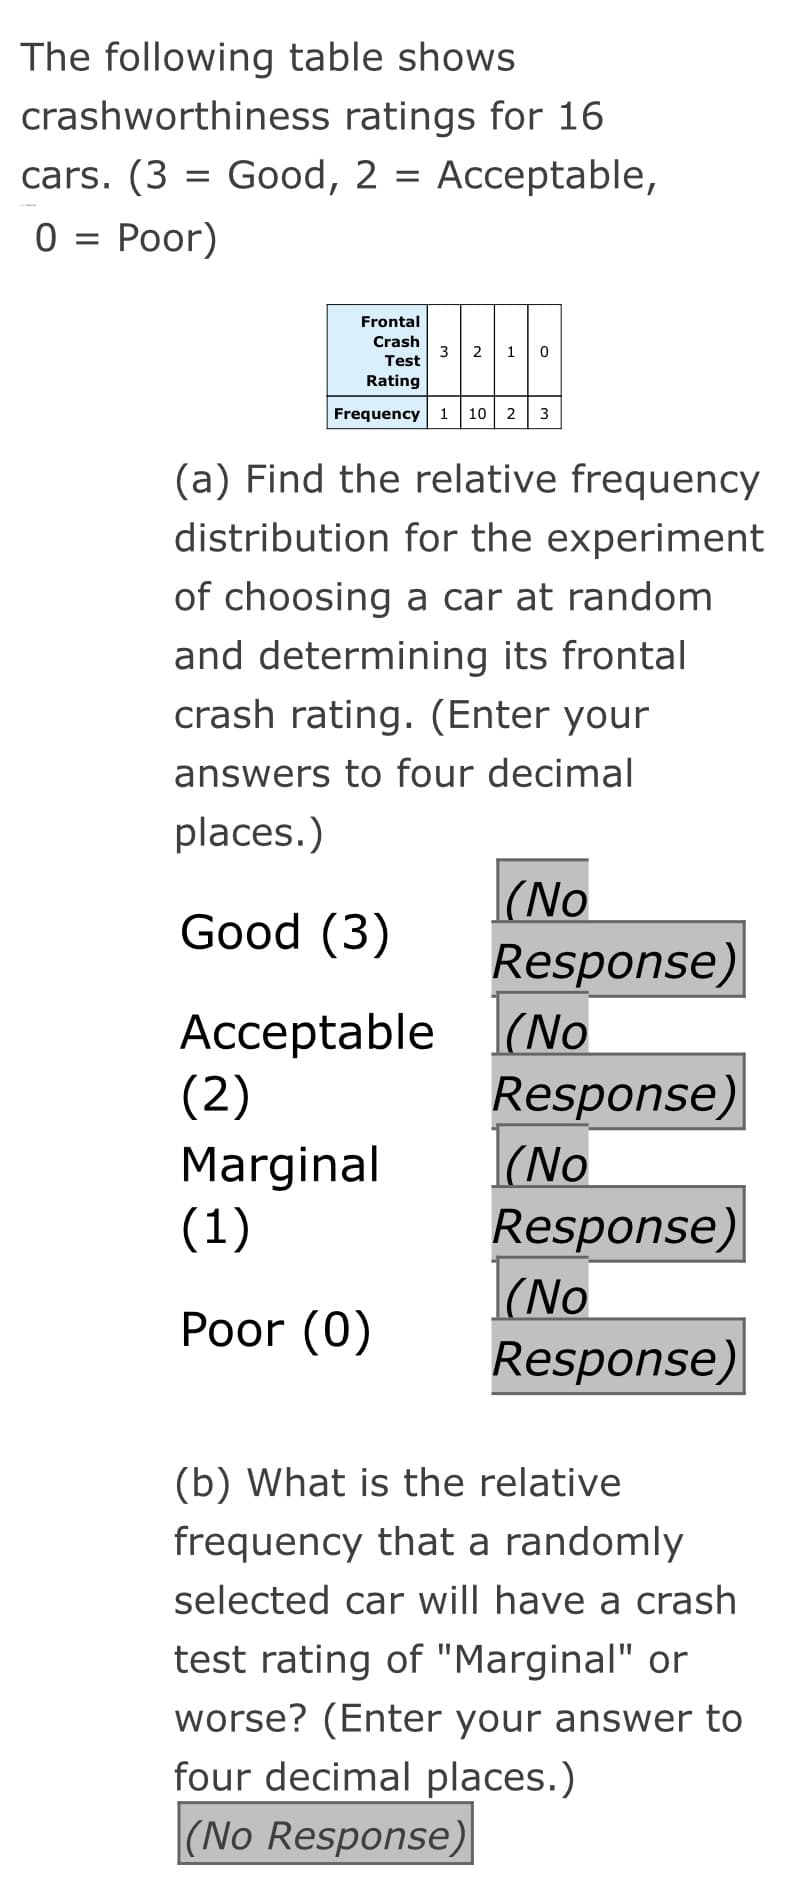 The following table shows
crashworthiness ratings for 16
cars. (3 = Good, 2 = Acceptable,
0 = Poor)
Frontal
Crash
3
Test
2
Rating
Frequency 1
10
2
3
(a) Find the relative frequency
distribution for the experiment
of choosing a car at random
and determining its frontal
crash rating. (Enter your
answers to four decimal
places.)
|(No
Good (3)
Response)
|(No
Response)
|(No
Response)
|(No
Response)
Acceptable
(2)
Marginal
(1)
Poor (0)
(b) What is the relative
frequency that a randomly
selected car will have a crash
test rating of "Marginal" or
worse? (Enter your answer to
four decimal places.)
|(No Response)
